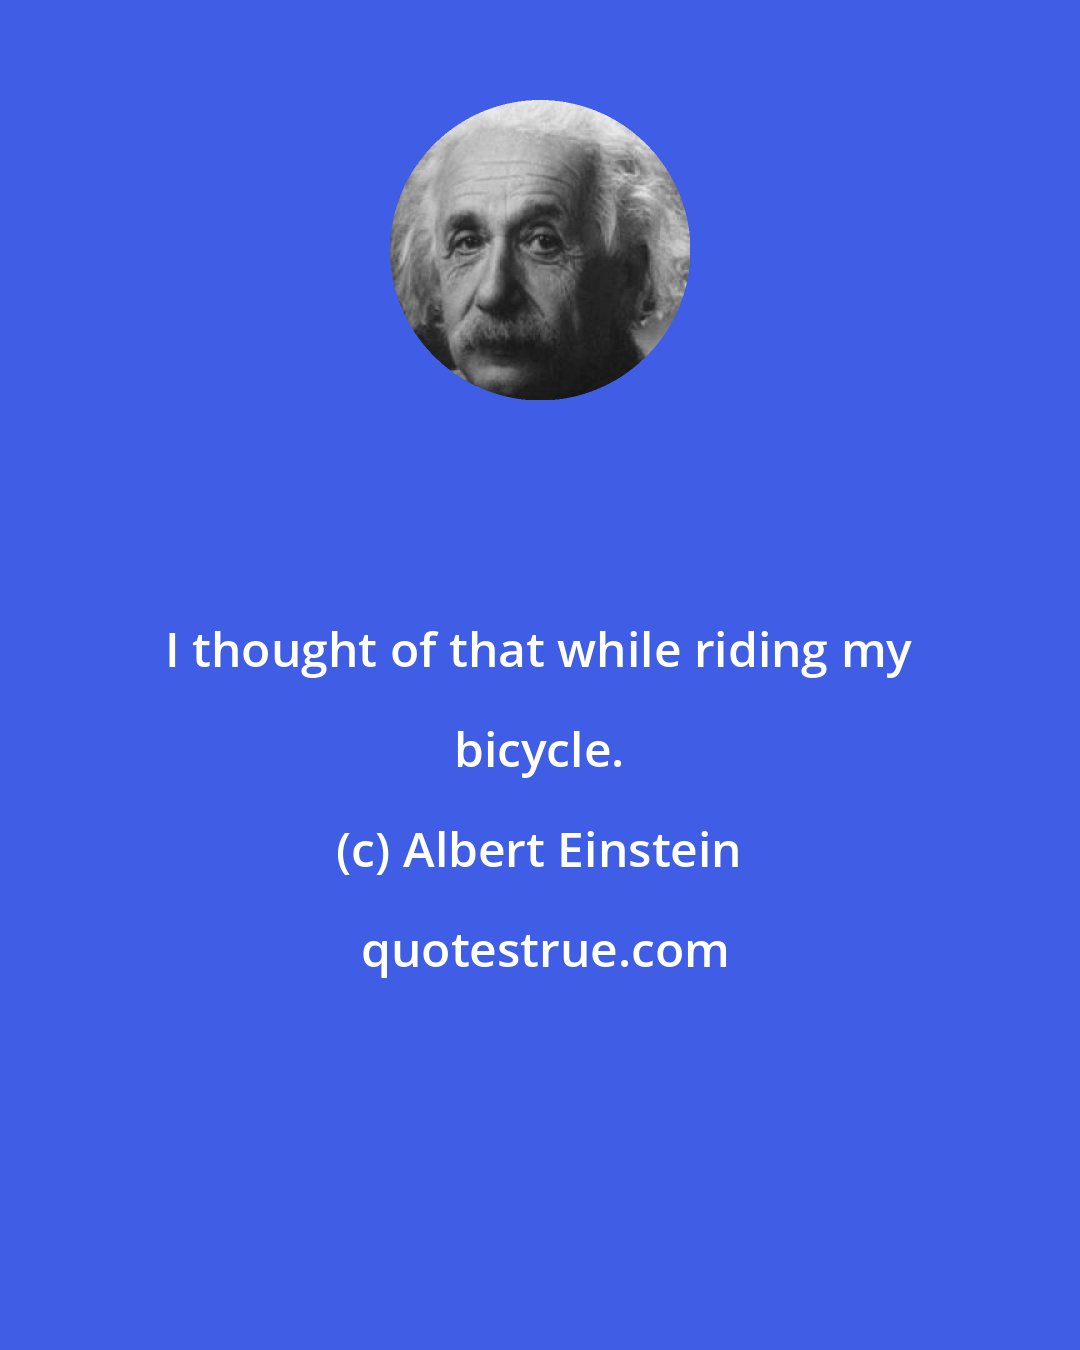 Albert Einstein: I thought of that while riding my bicycle.